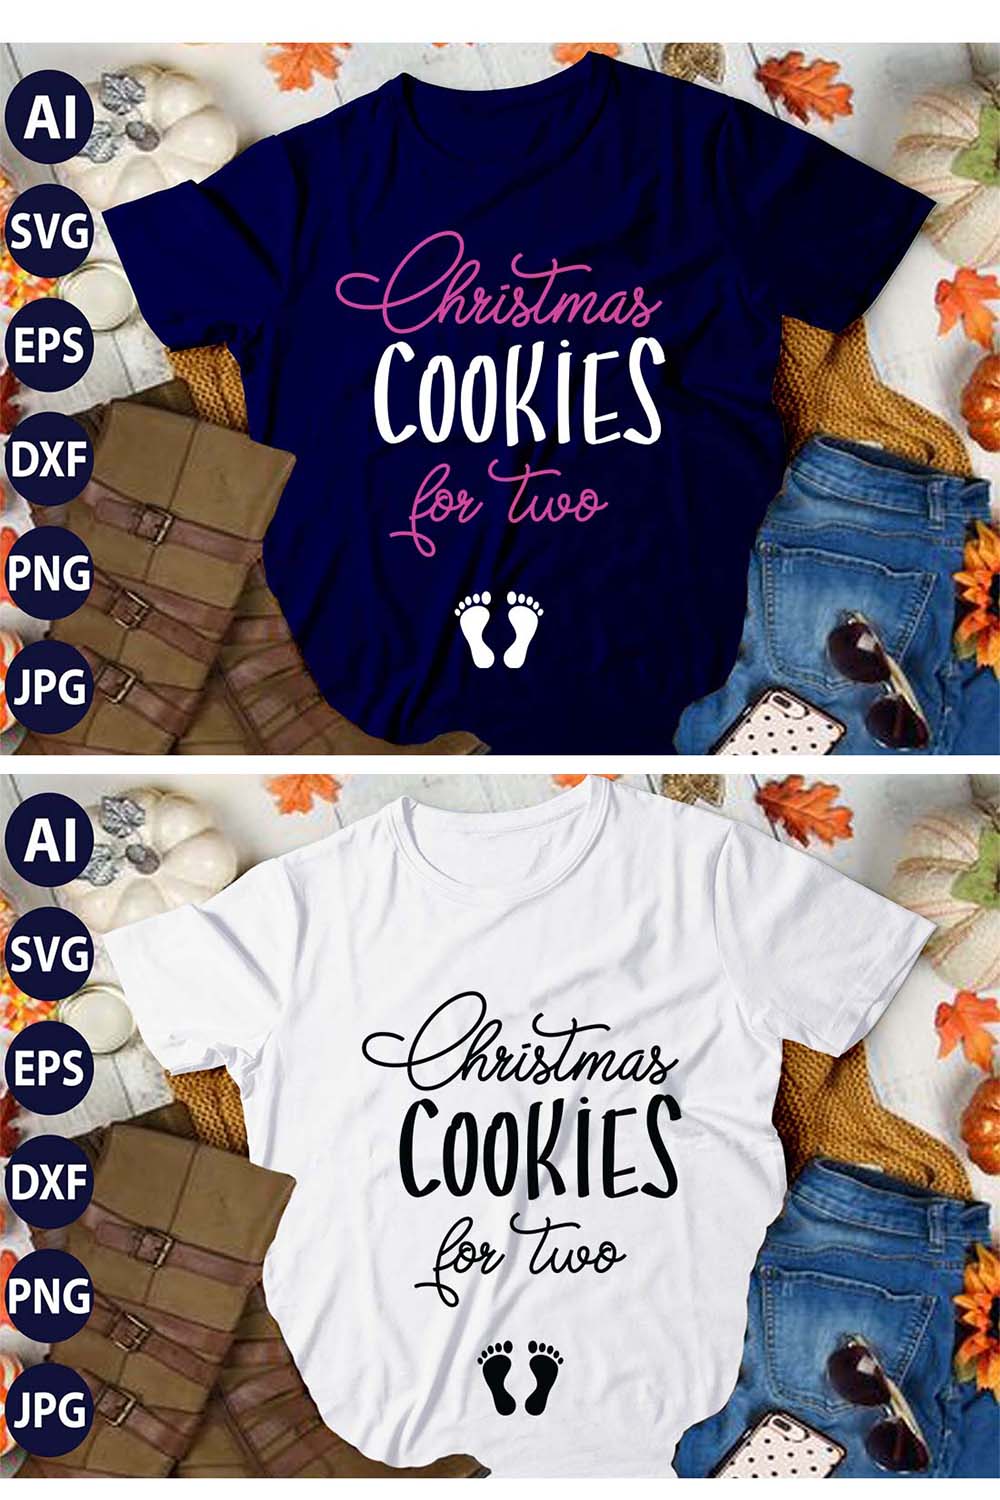 Christmas Cookies For Two, SVG T-Shirt Design |Christmas Retro It's All About Jesus Typography Tshirt Design | Ai, Svg, Eps, Dxf, Jpeg, Png, Instant download T-Shirt | 100% print-ready Digital vector file pinterest preview image.